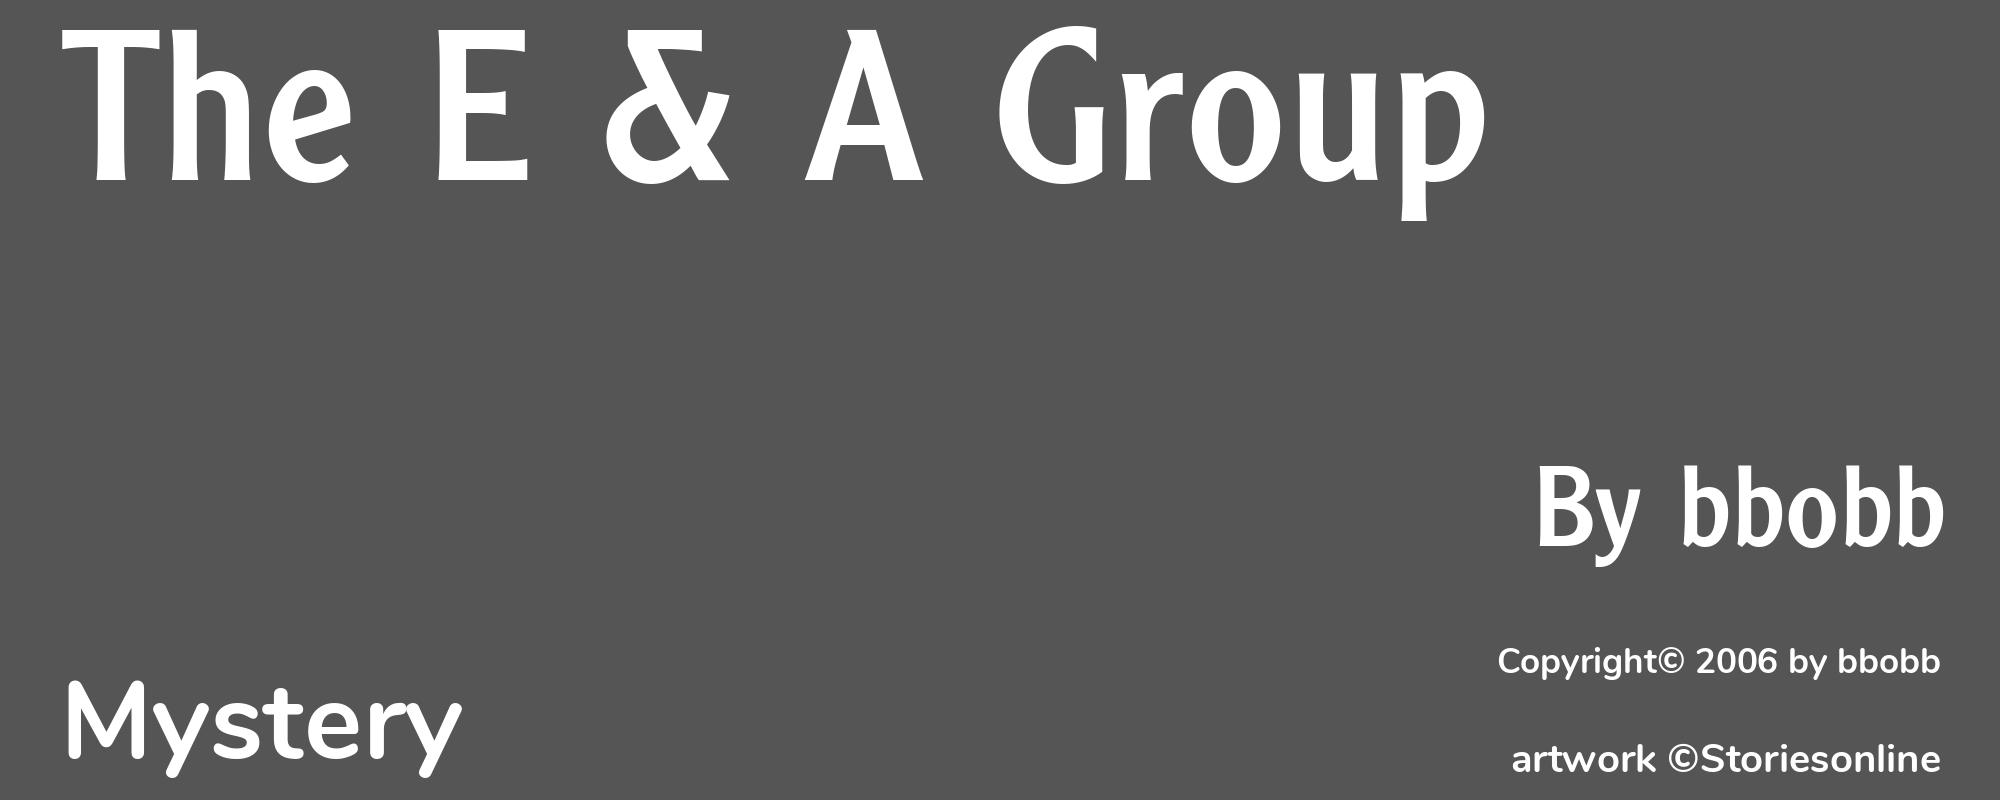 The E & A Group - Cover